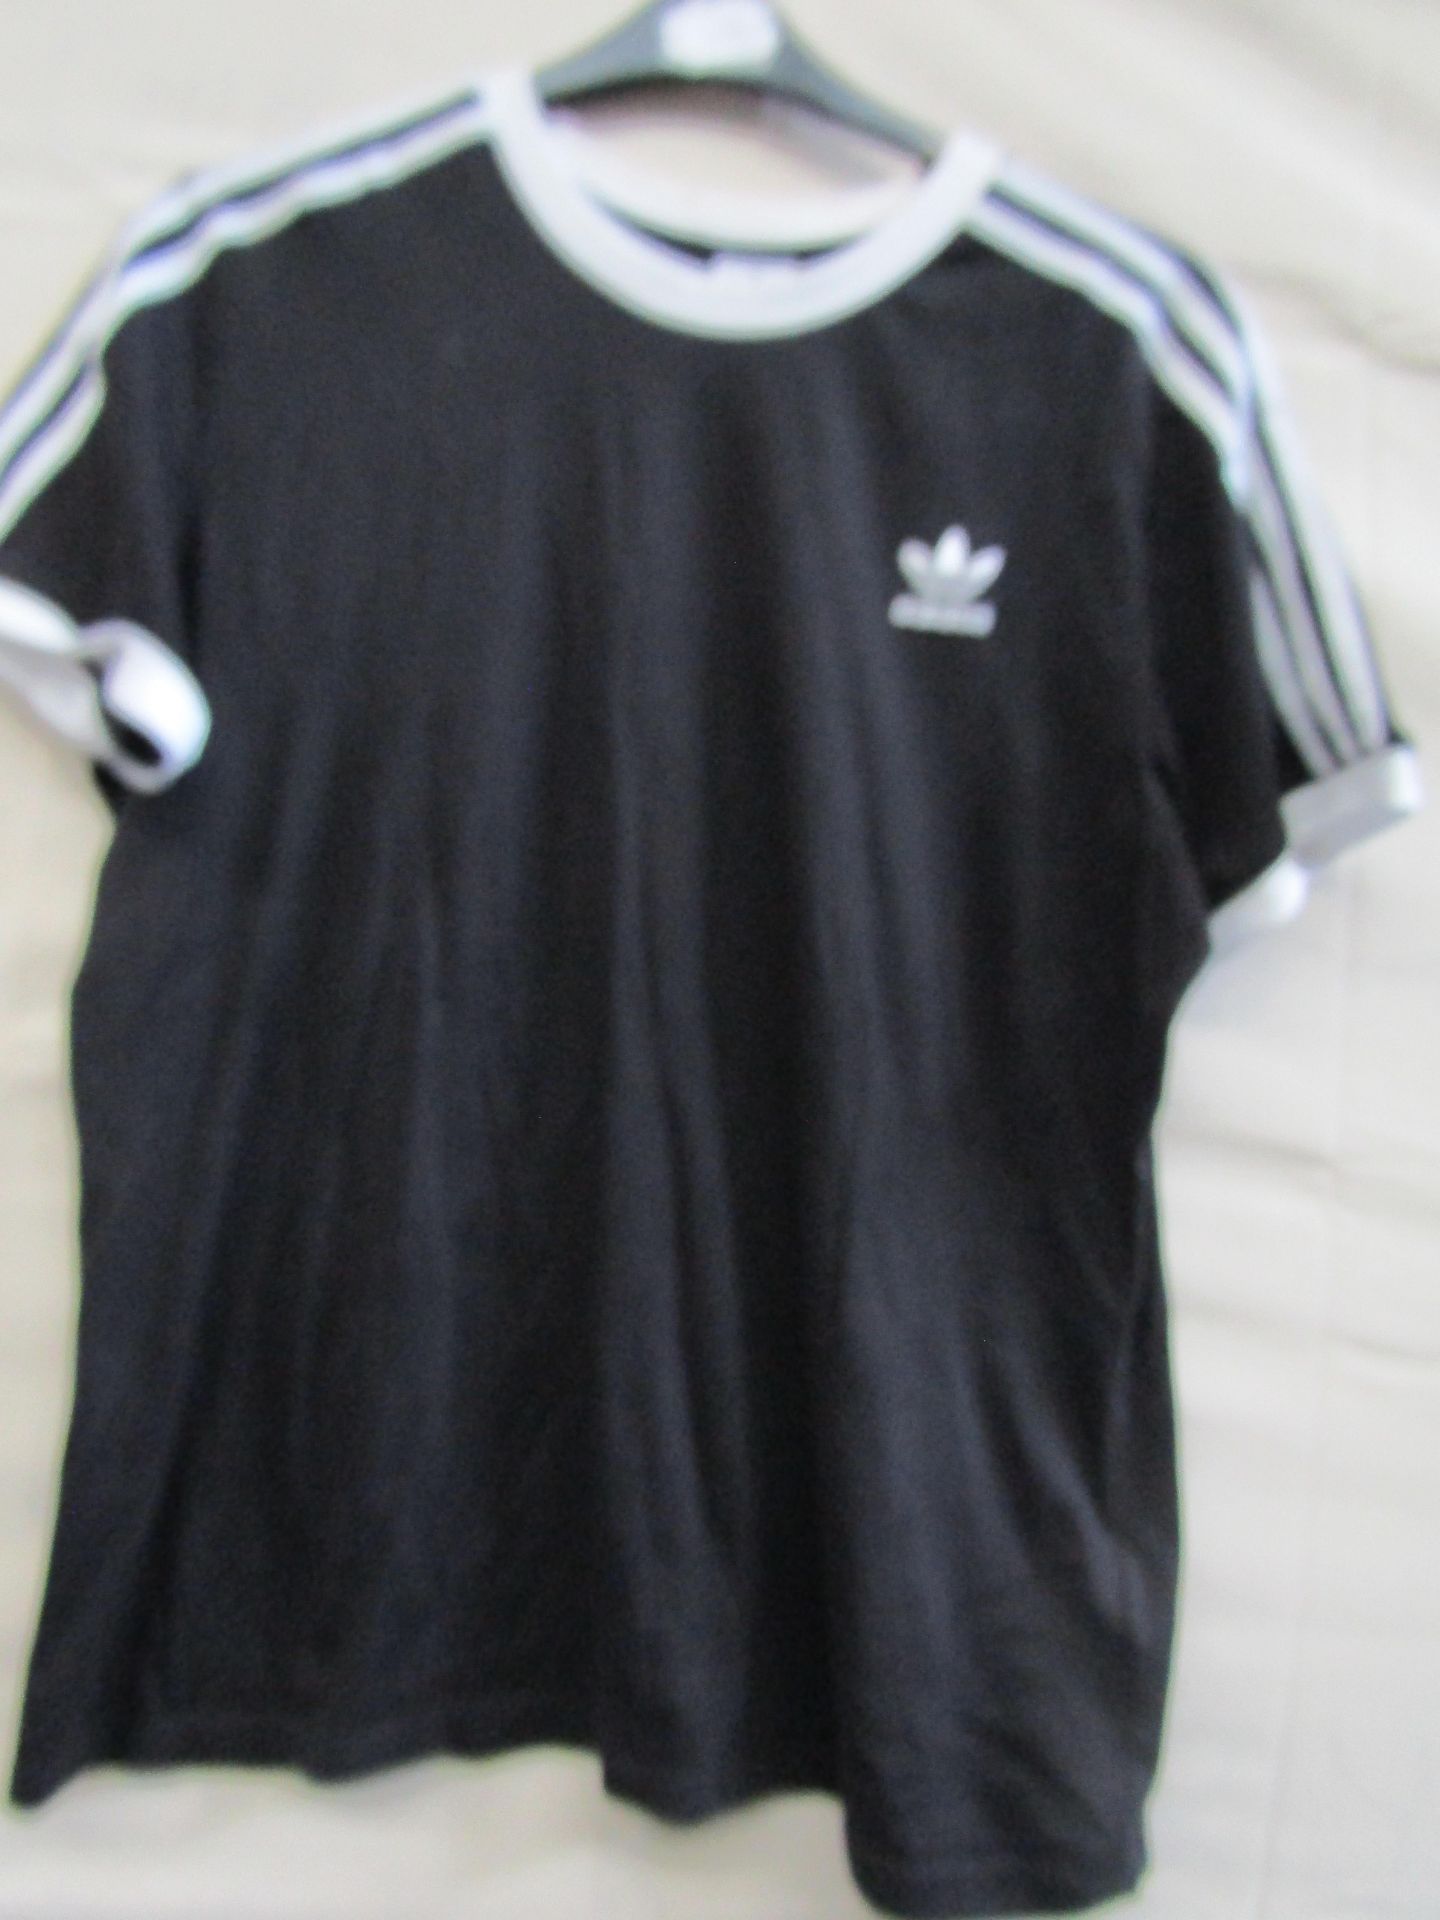 Adidas T/Shirt Black/White Size Approx M ( Has Been Worn ) Fair Condition